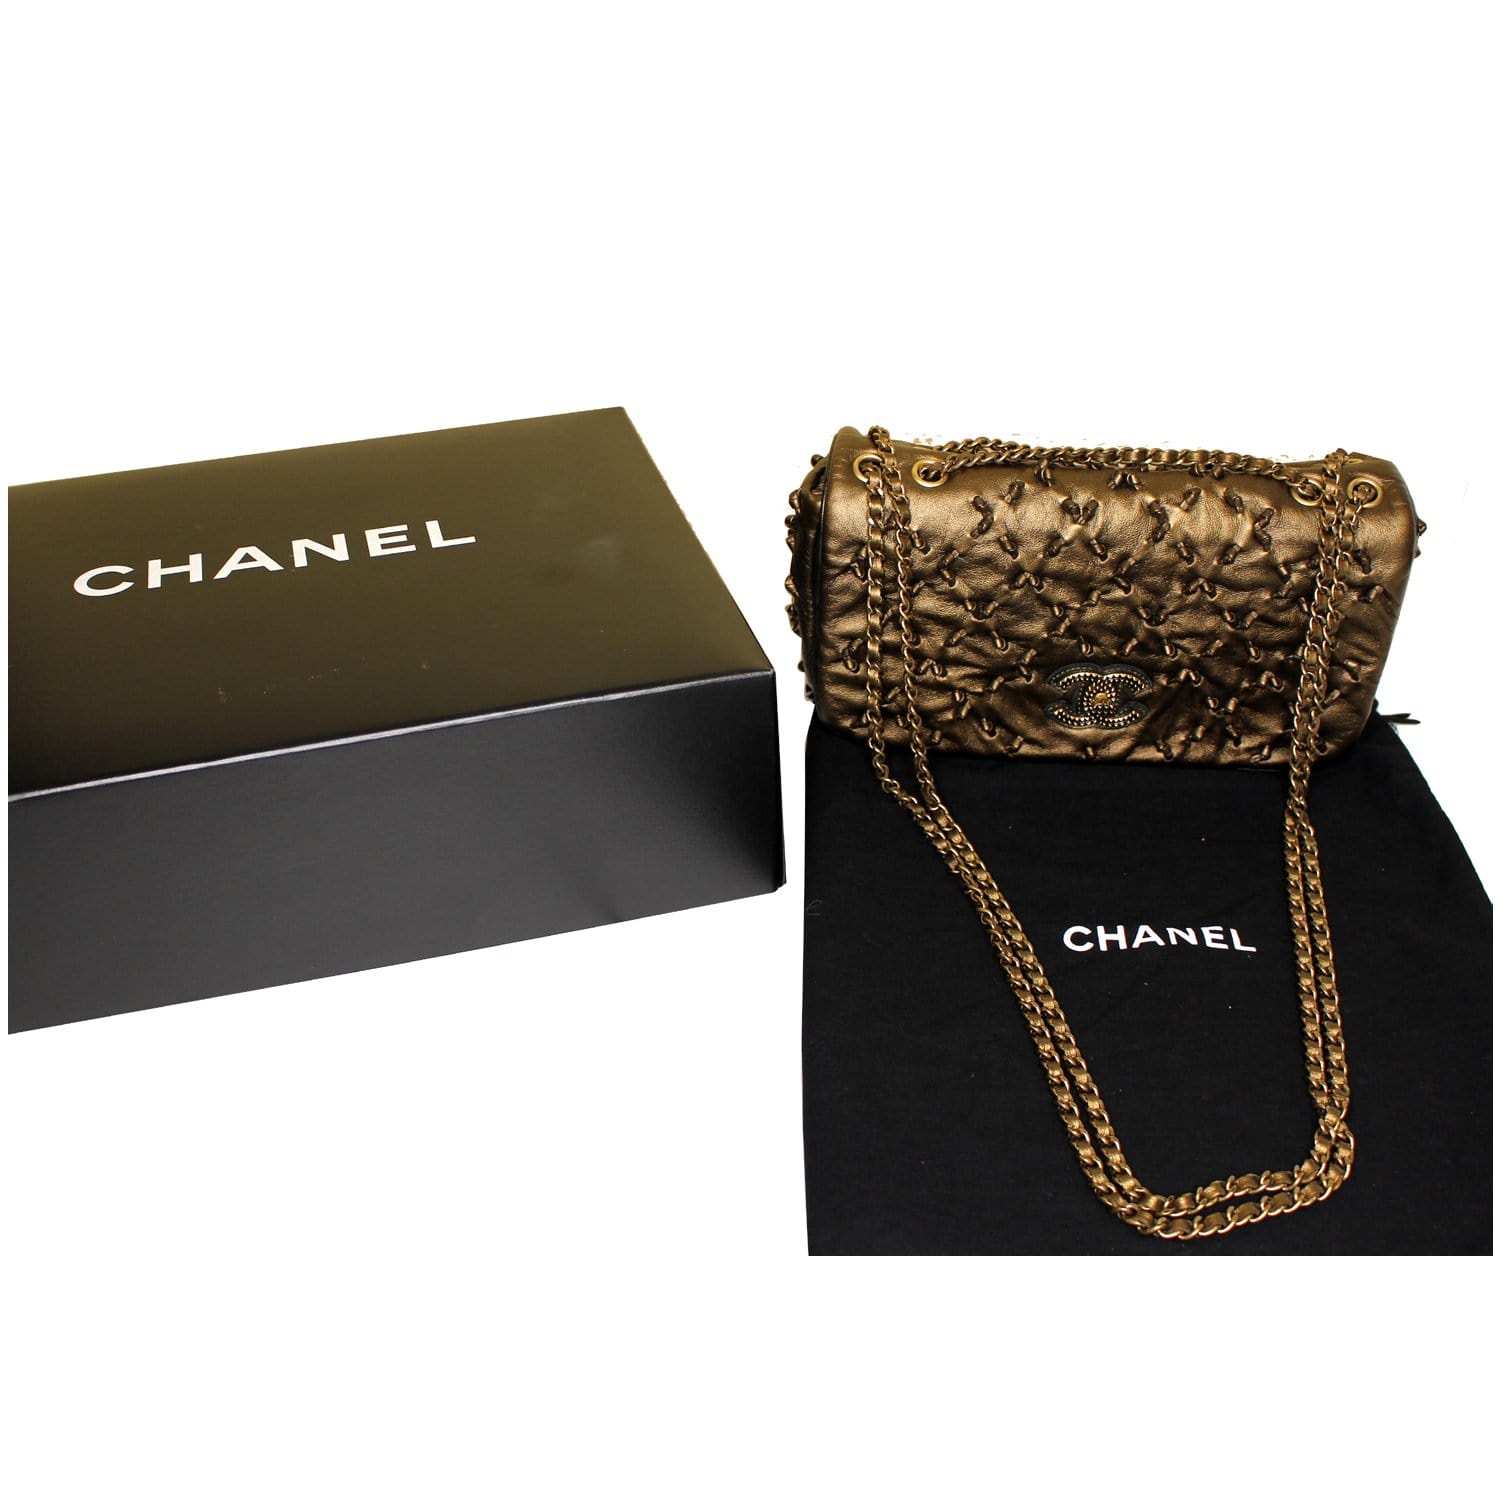 CHANEL Classic Flap Chic Knot Lambskin Leather Shoulder Bag Bronze